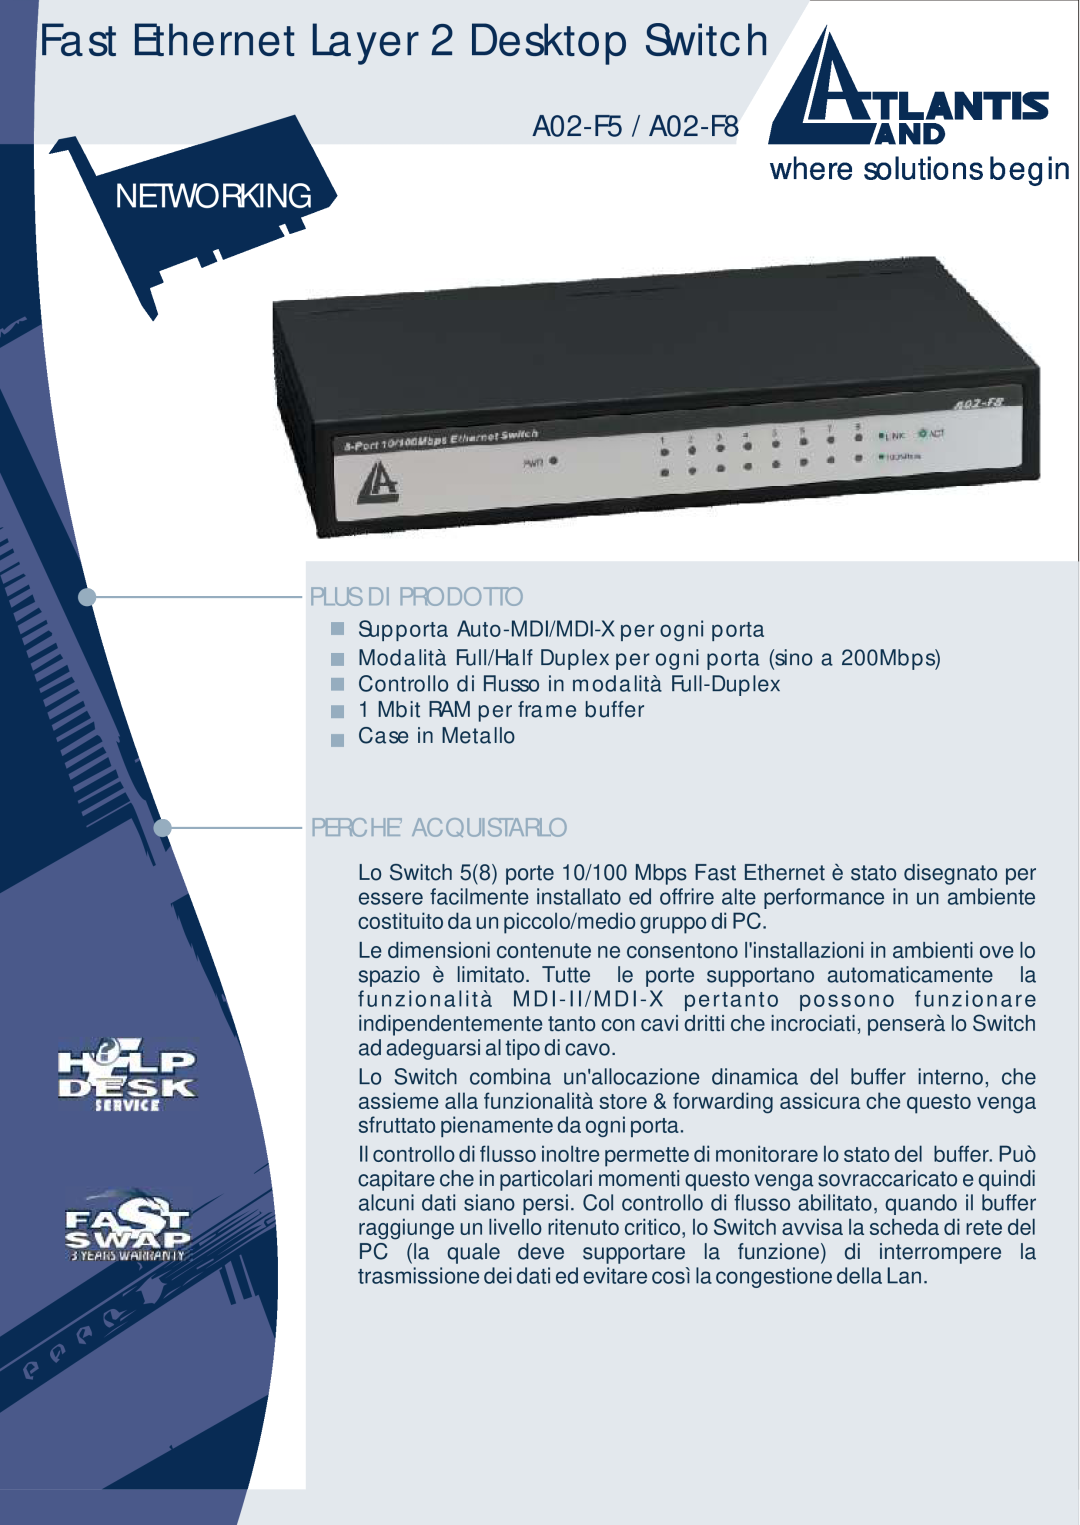 Atlantis Land manual Fast Ethernet Layer 2 Desktop Switch, Networking, where solutions begin, A02-F5 / A02-F8 